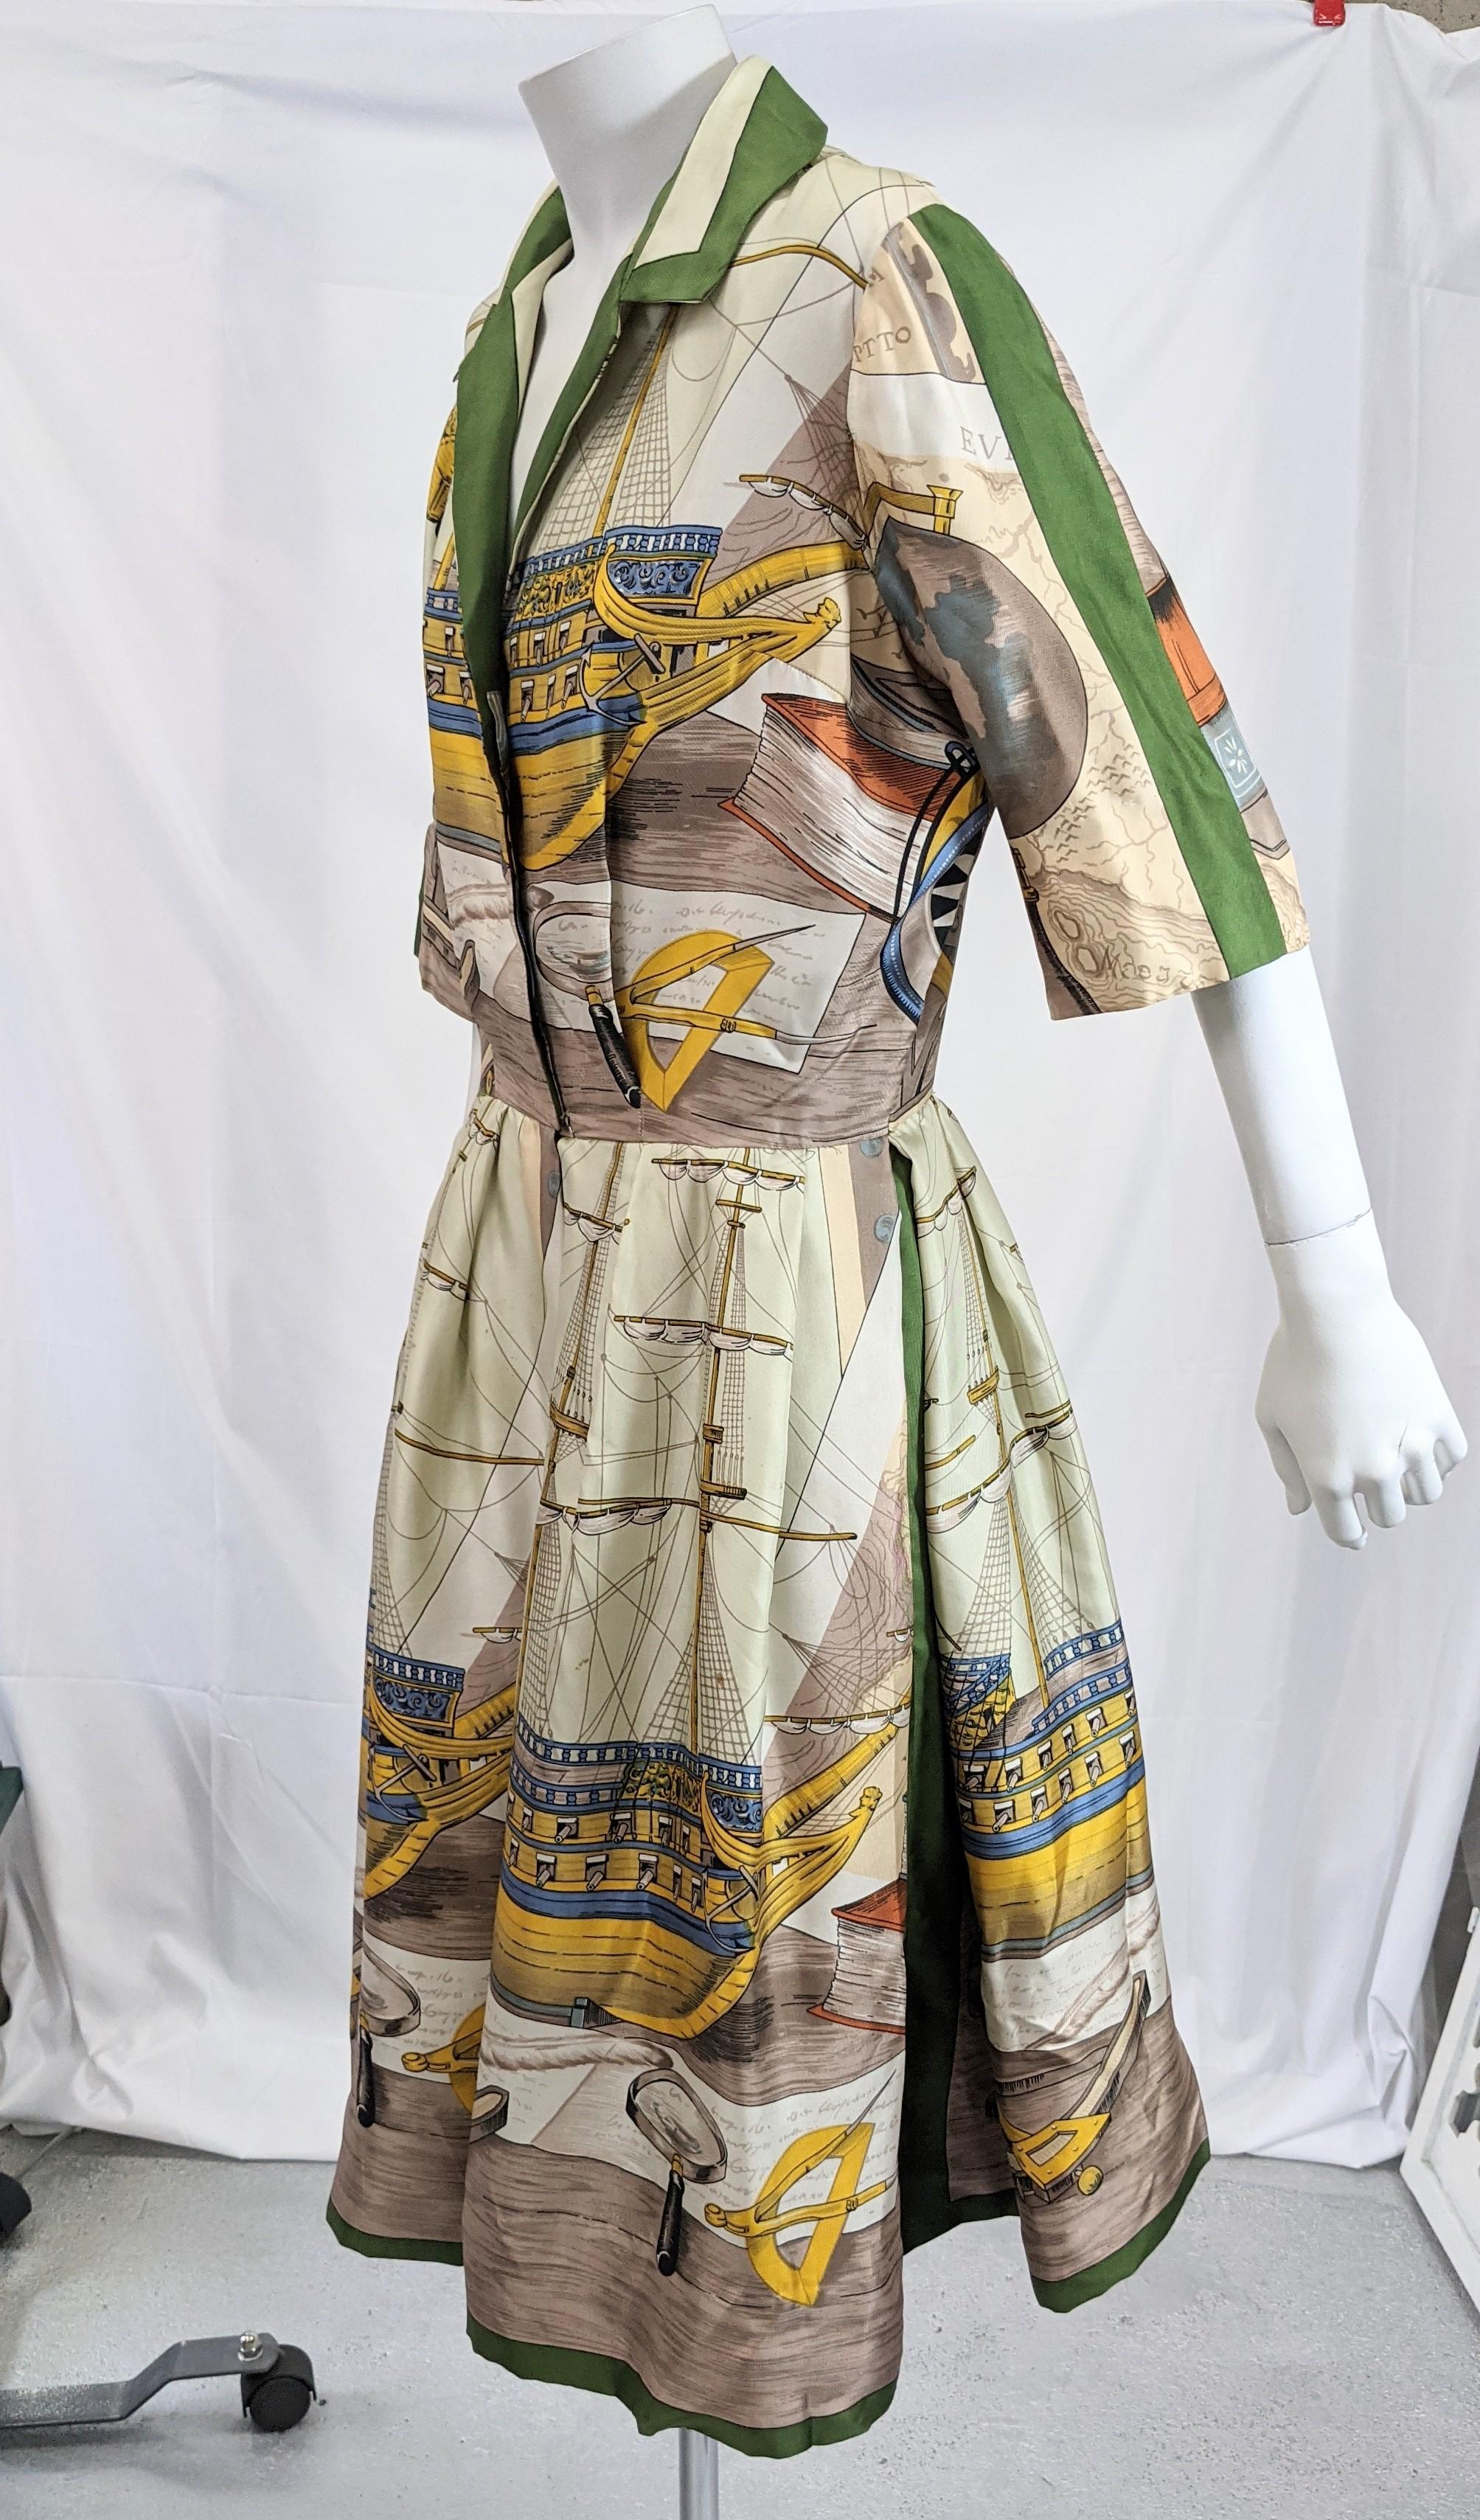 Hermes inspired nautical themed silk twill shirtwaist dress. The Hermes style amusing silk scarf print of clipper ships in blues, browns, gold and greens. Skirt organza lined to create fullness with deep pleats at sides and center back. Covered